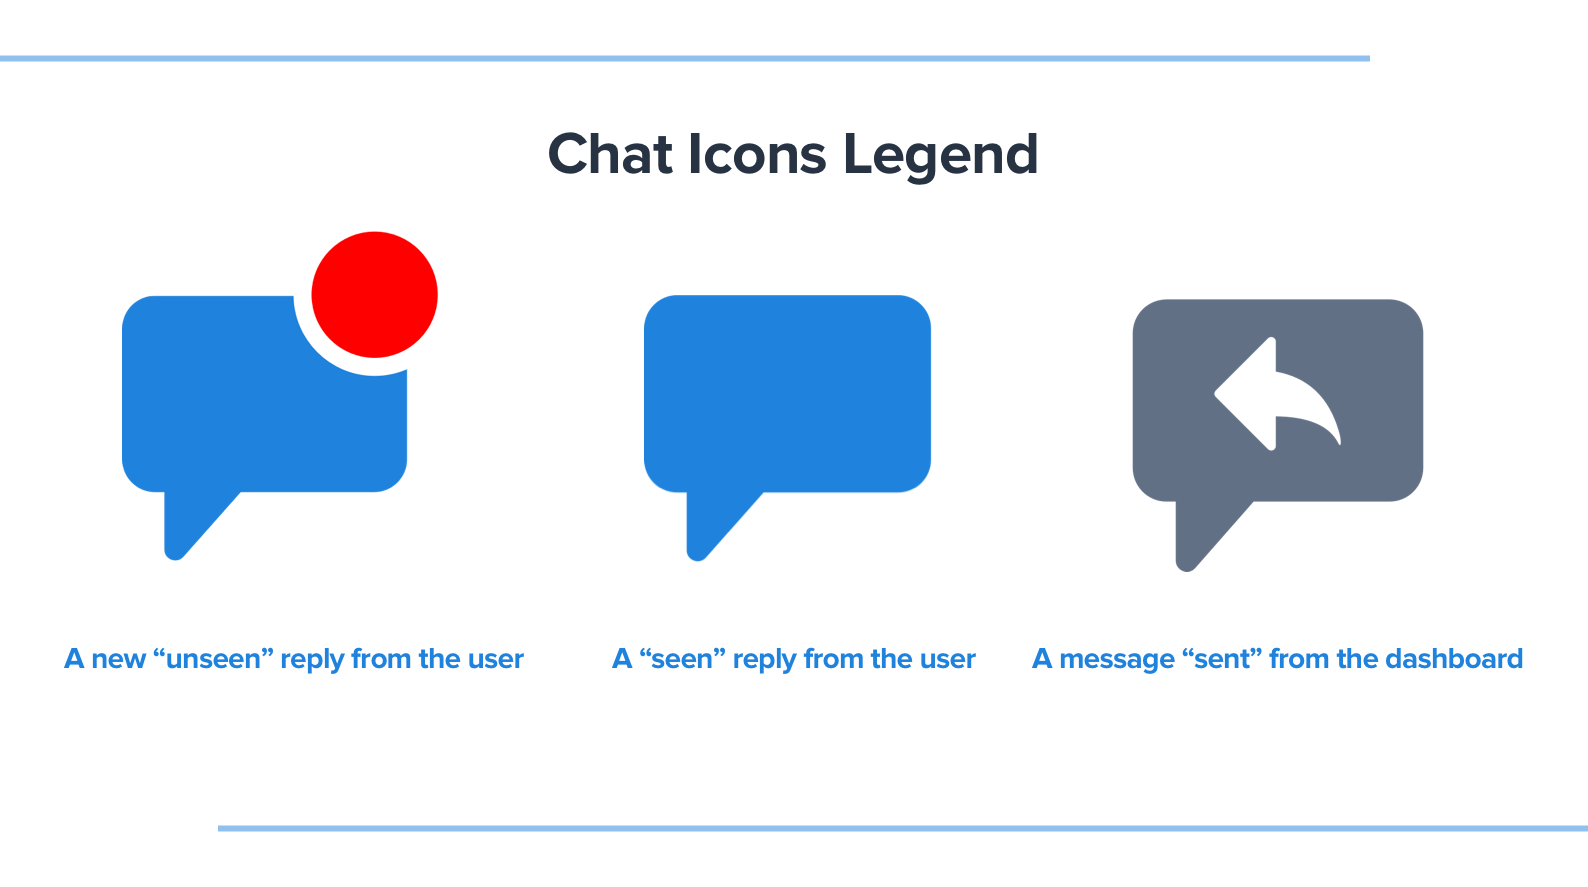 The chat icons are visible in your list of bug reports on the lefthand side of the bugs page in your dashboard.